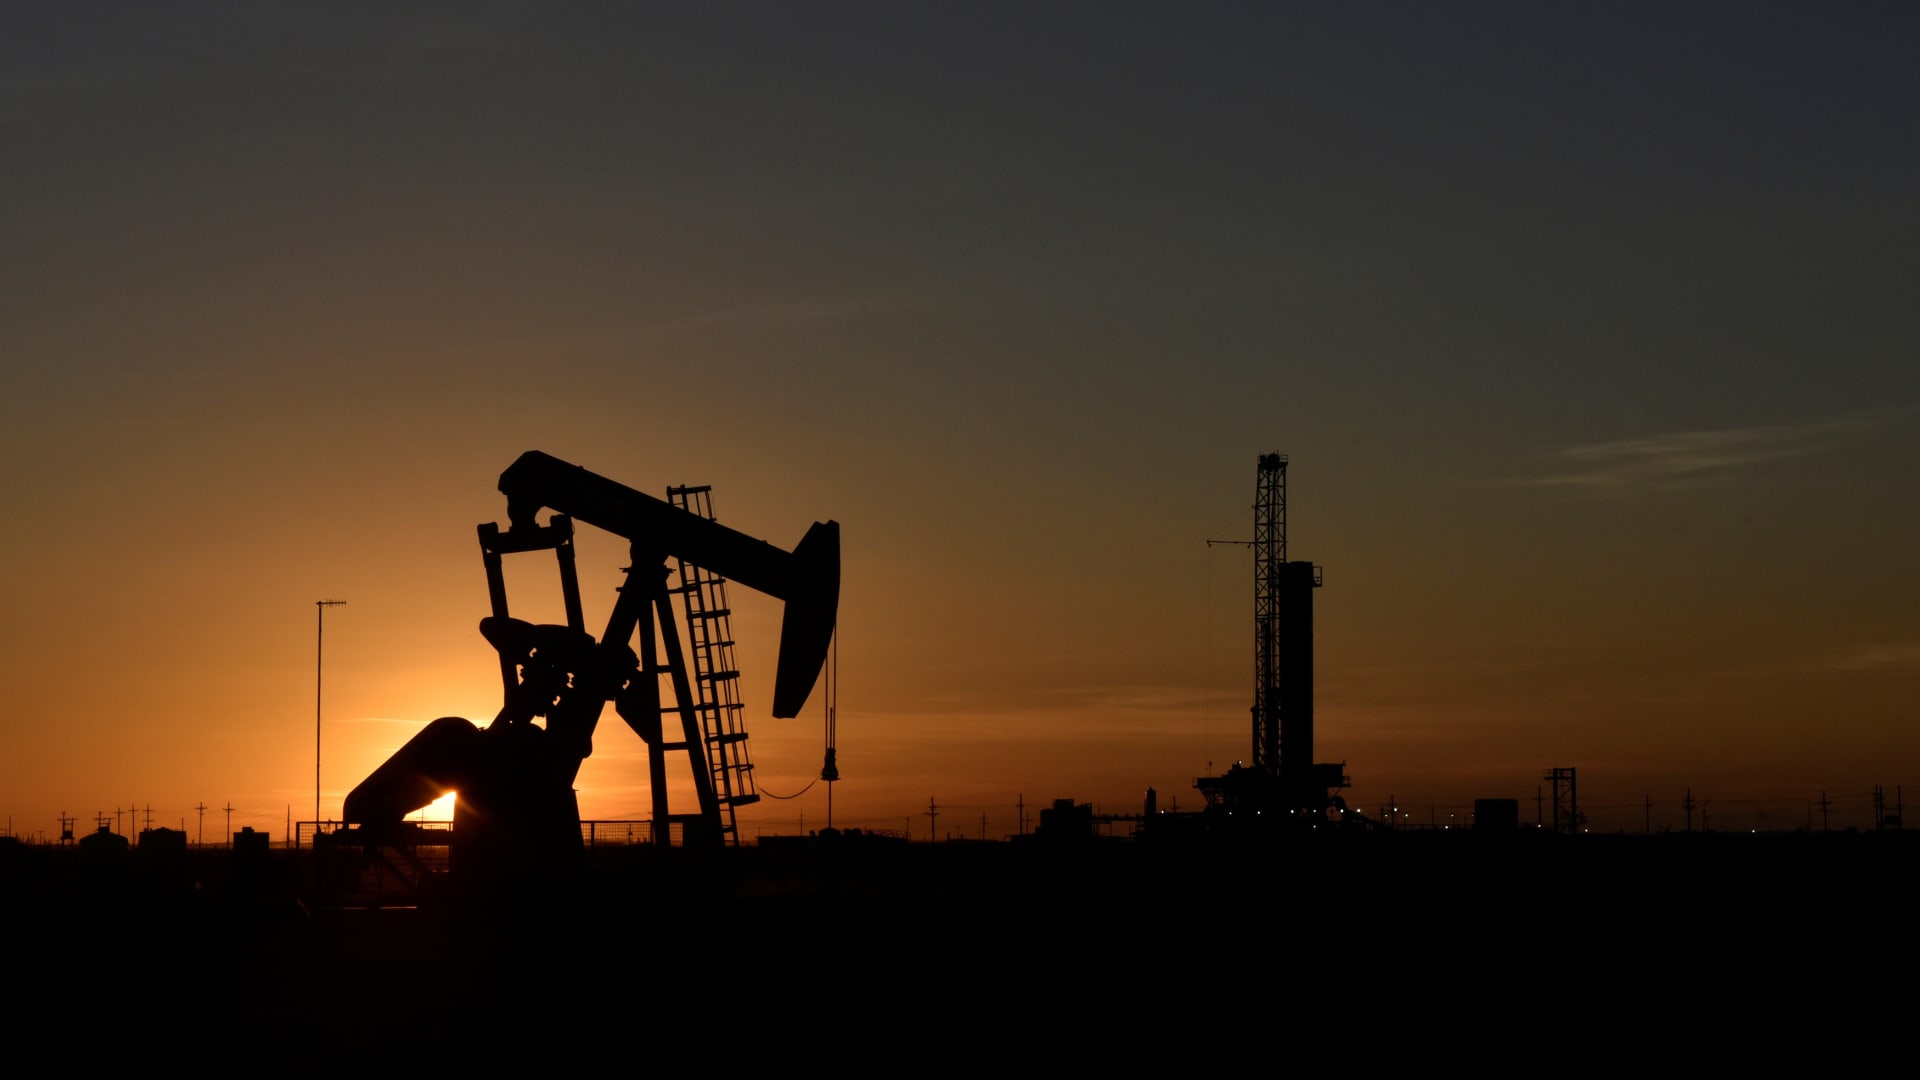 A pump jack operates in front of a drilling rig at sunset in an oil field in Midland, Texas U.S. August 22, 2018.